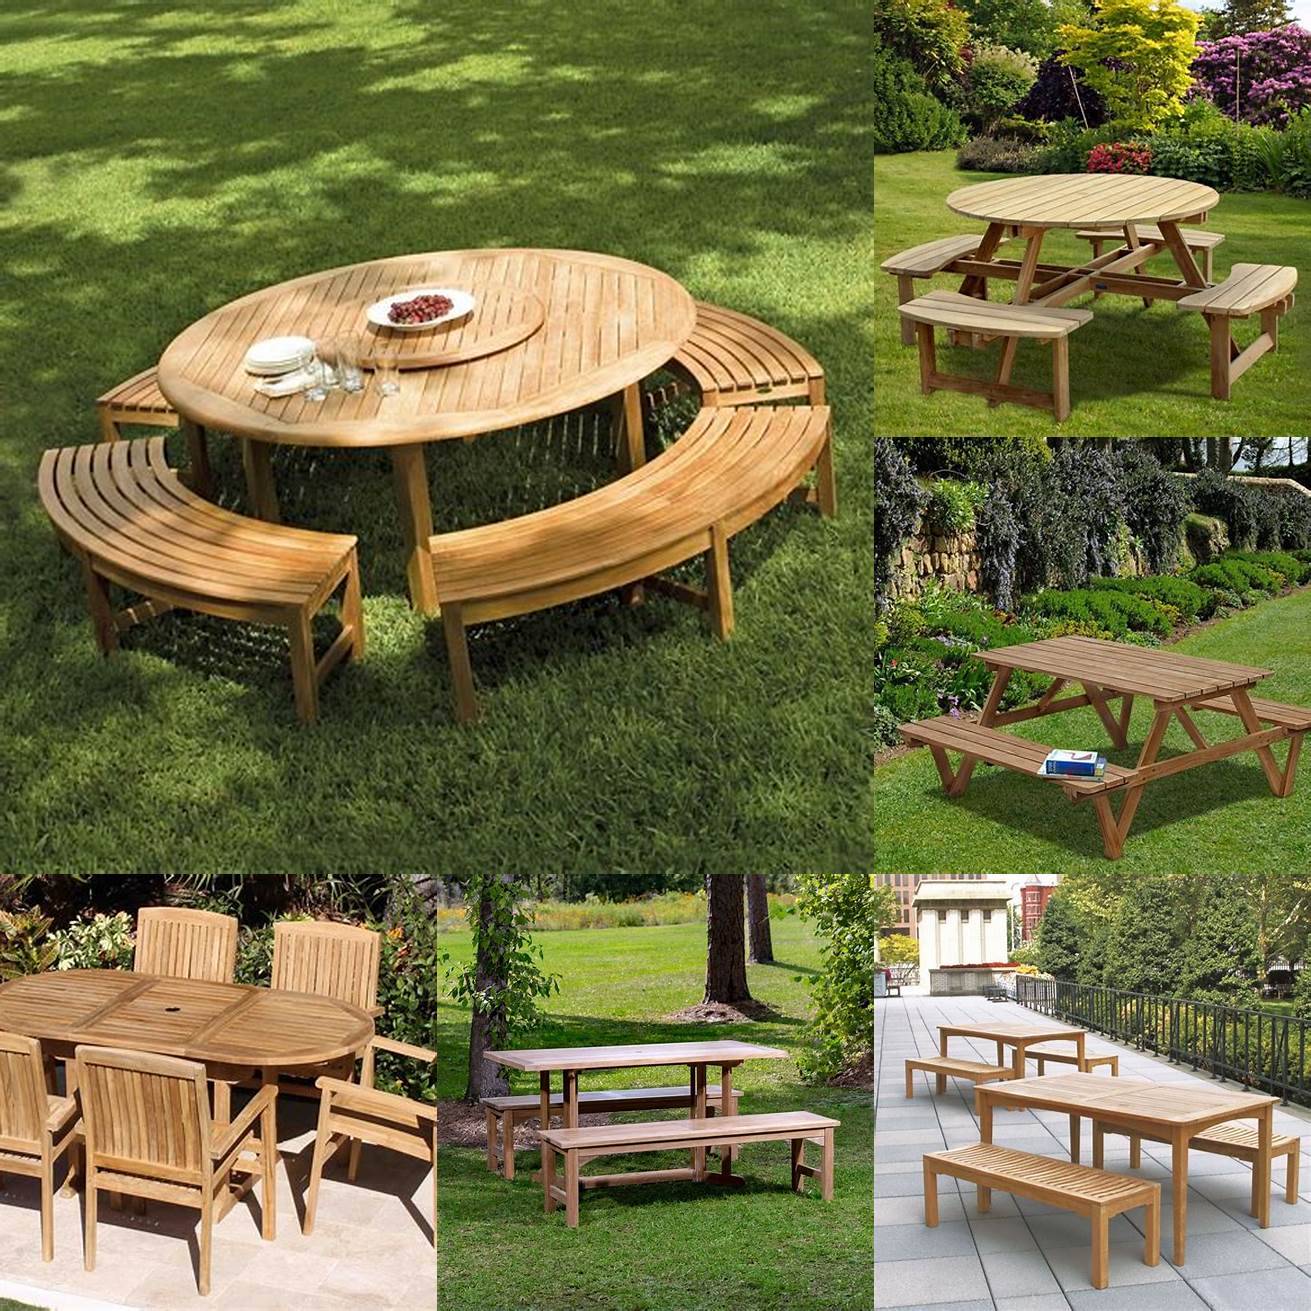 Teak Picnic Table and Benches With Wine Rack